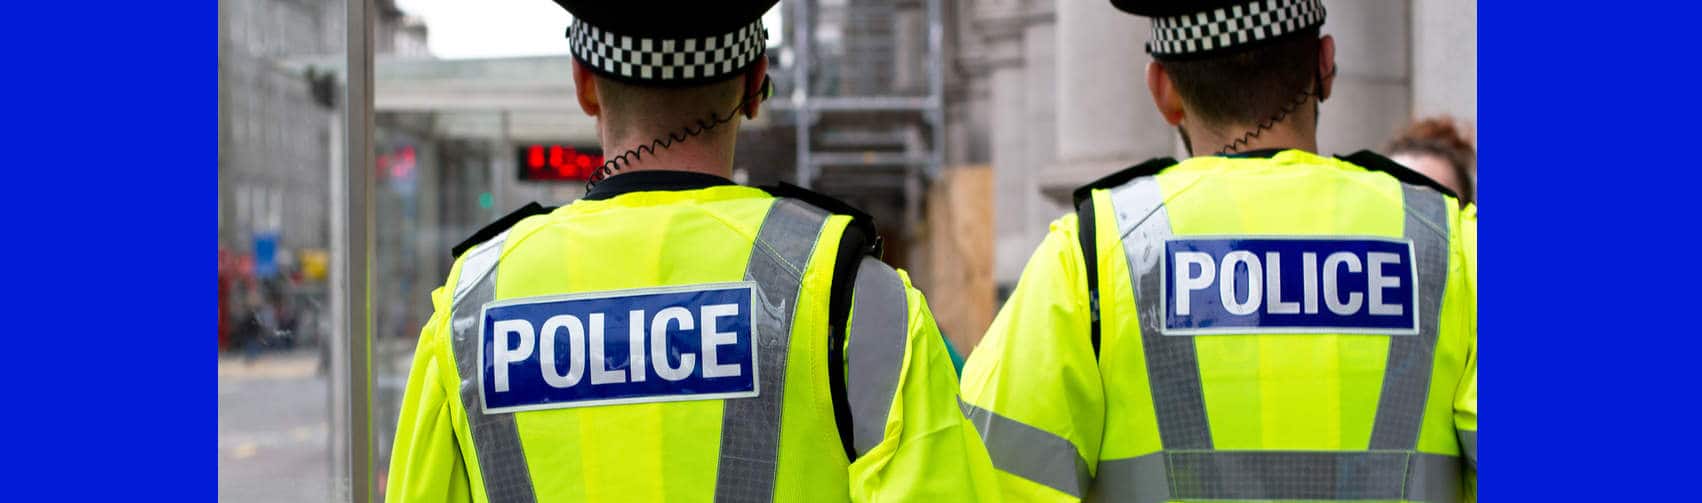 West Midlands Police are “failing victims” according to watchdog